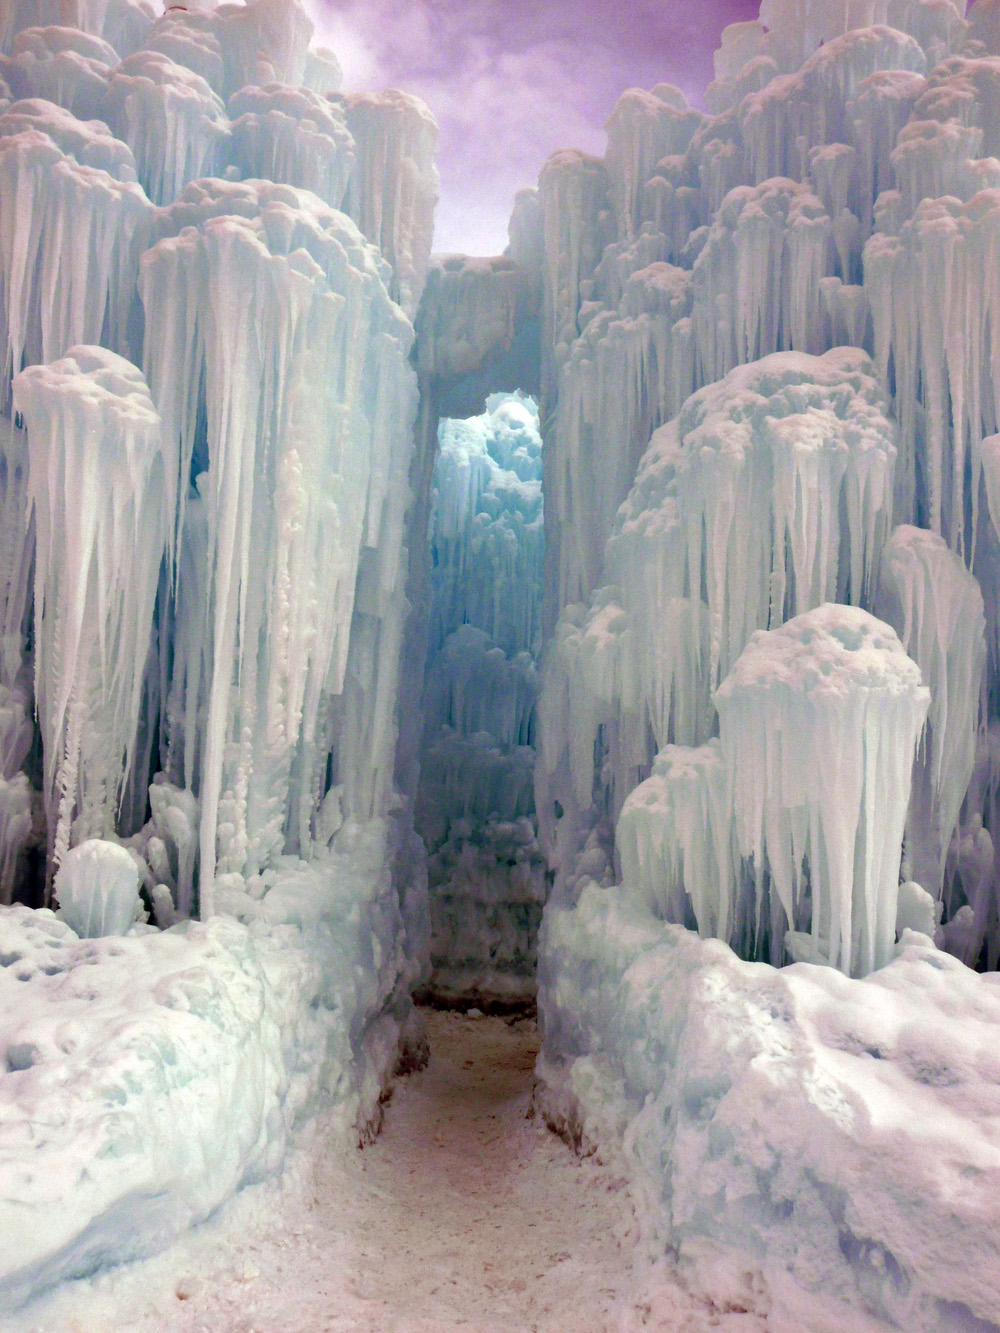 Been There, Done That: Midway Ice Castles